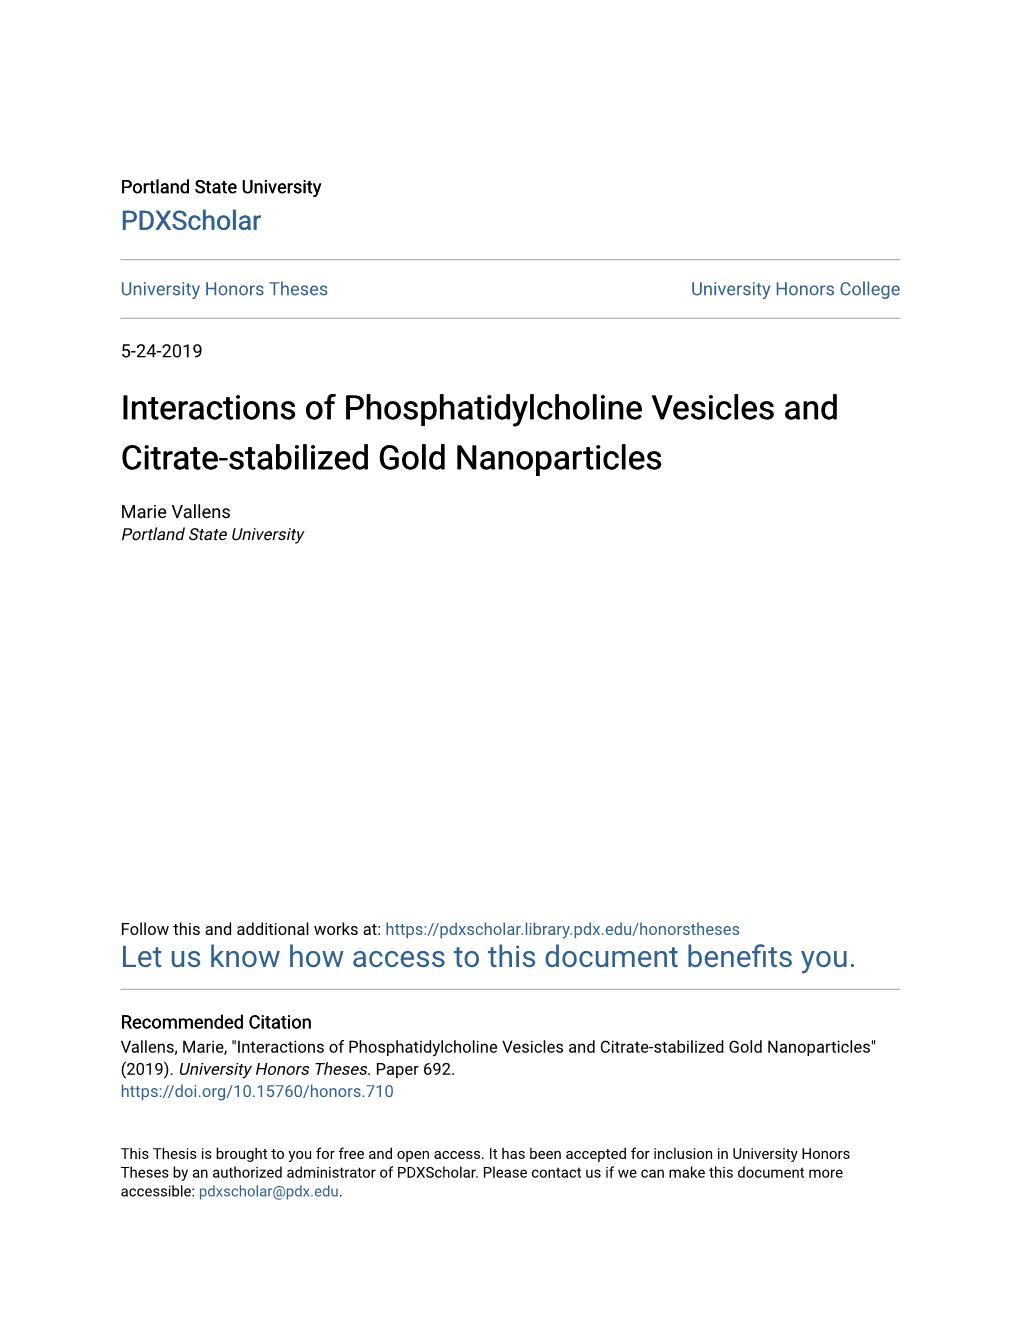 Interactions of Phosphatidylcholine Vesicles and Citrate-Stabilized Gold Nanoparticles